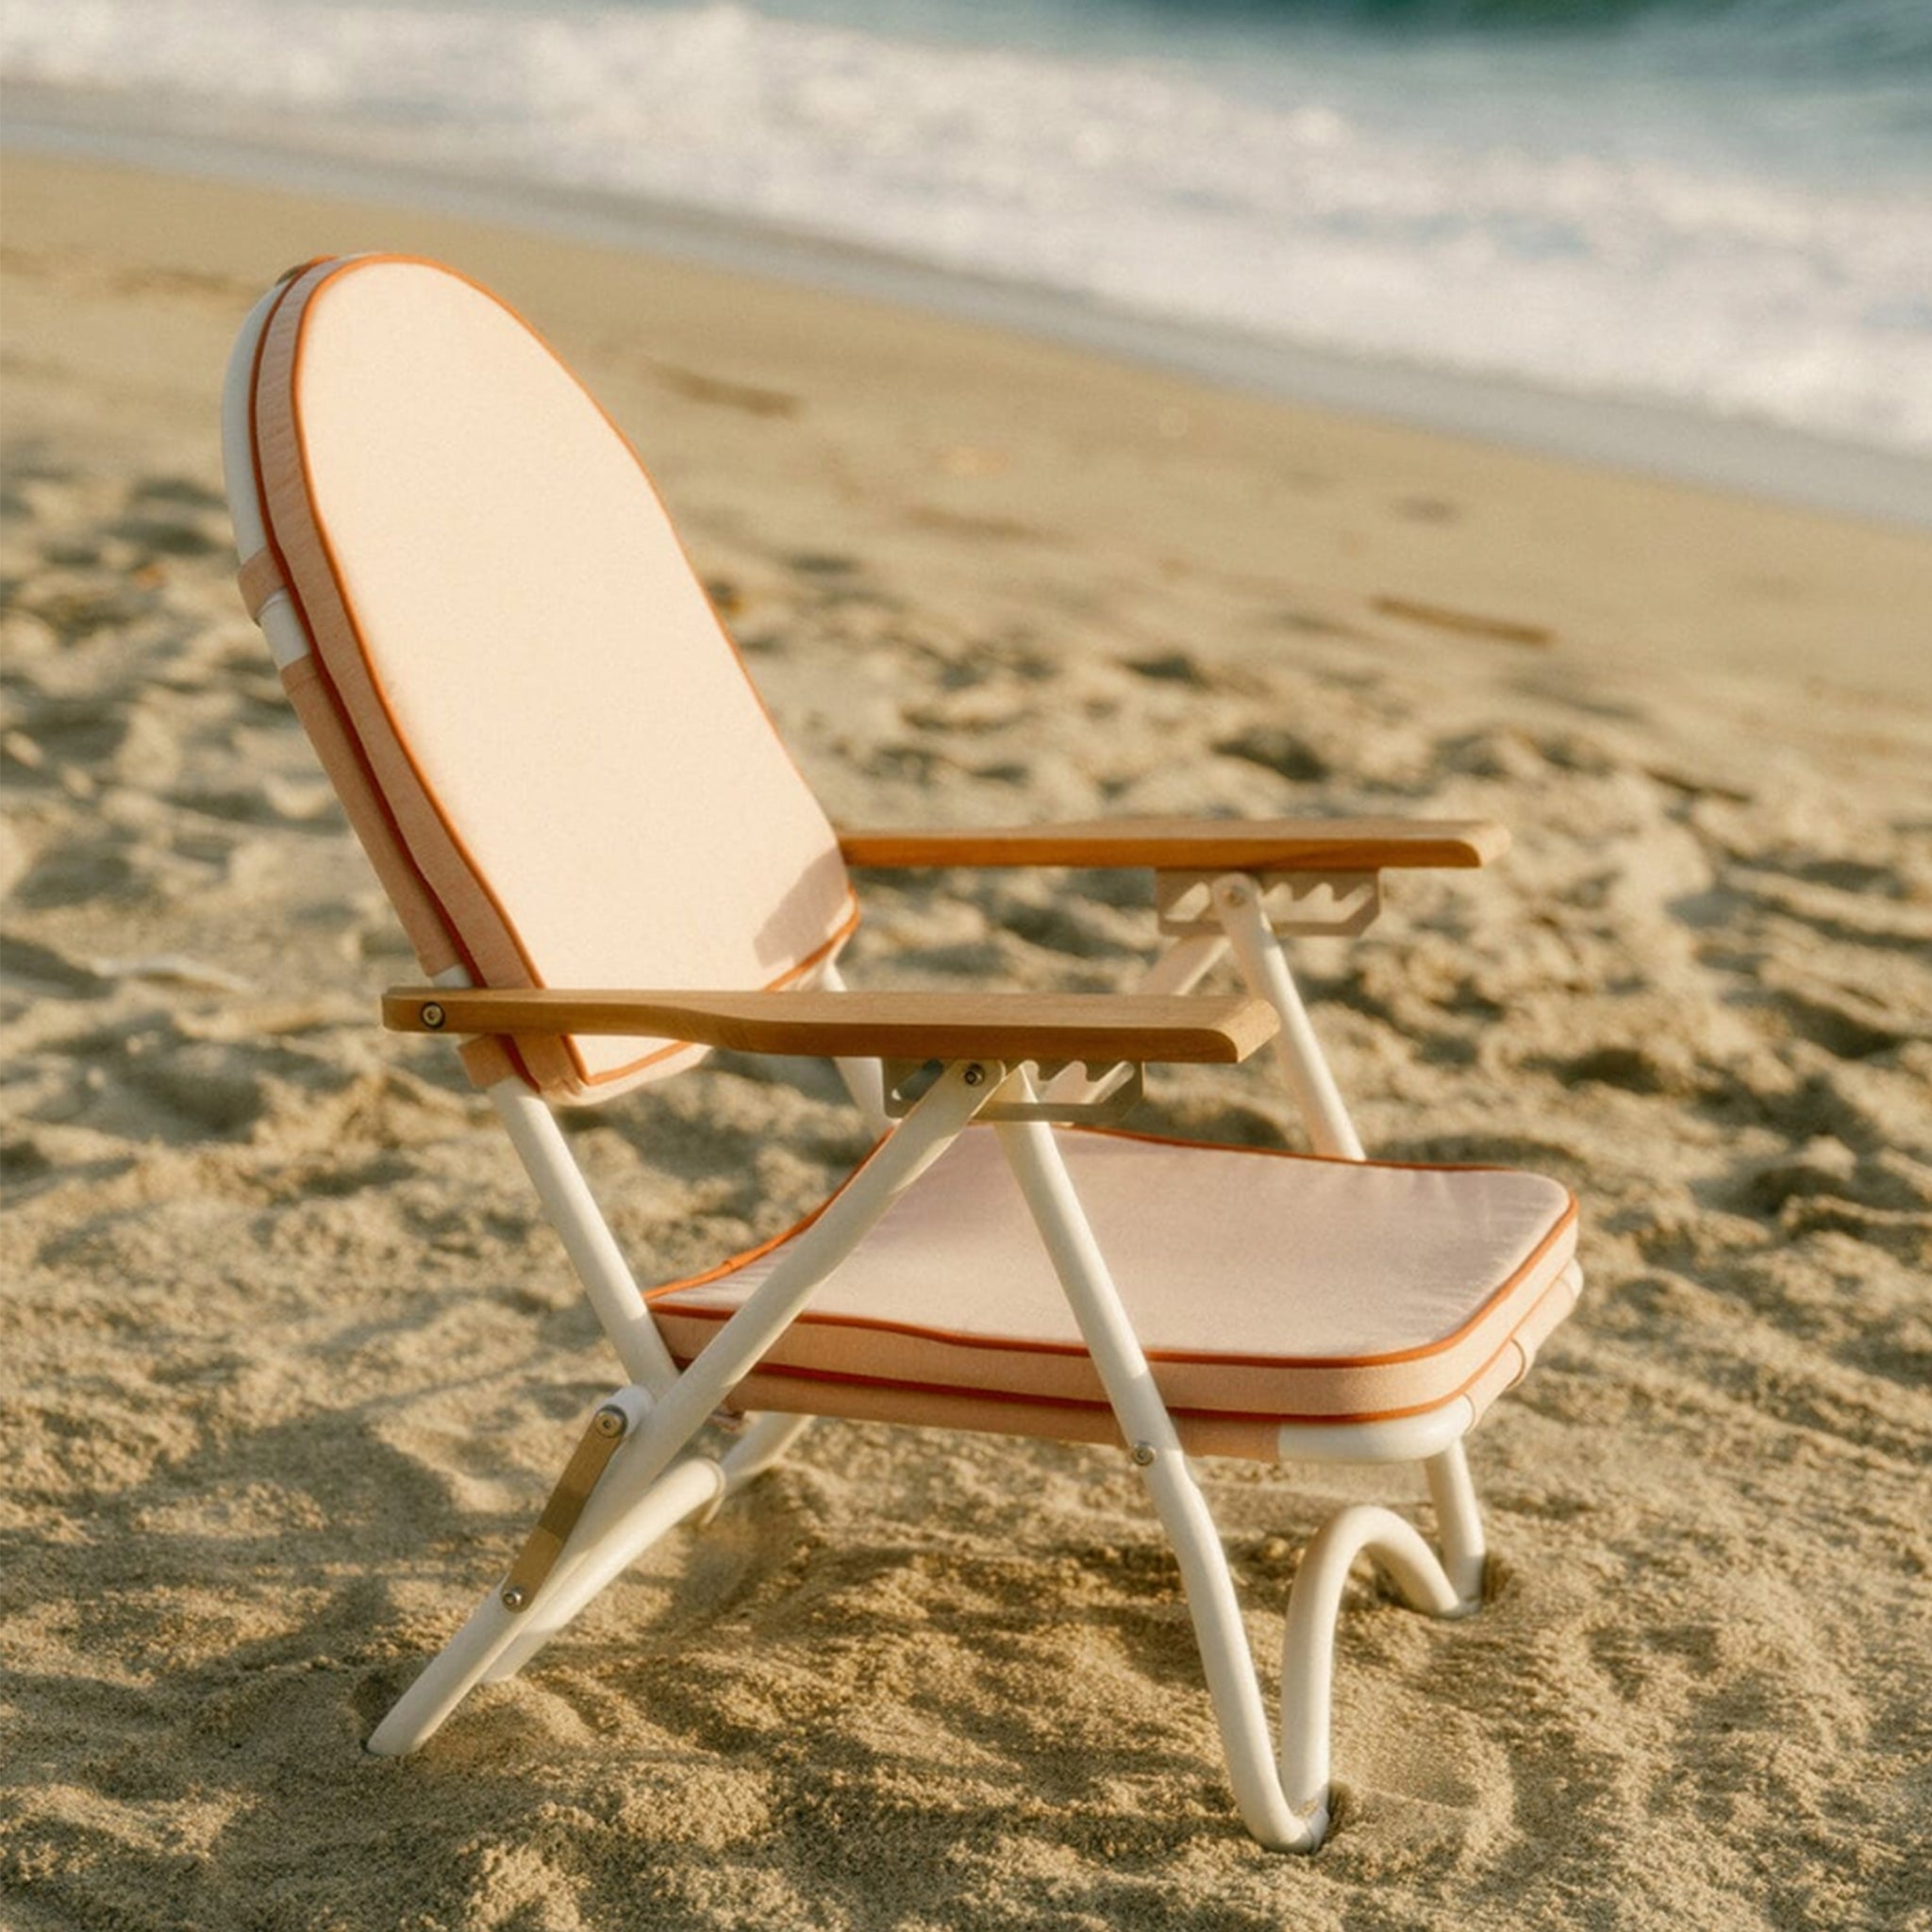 A pink arched folding beach chair with a reddish/dark pink lining around the edge and wood arm rests.